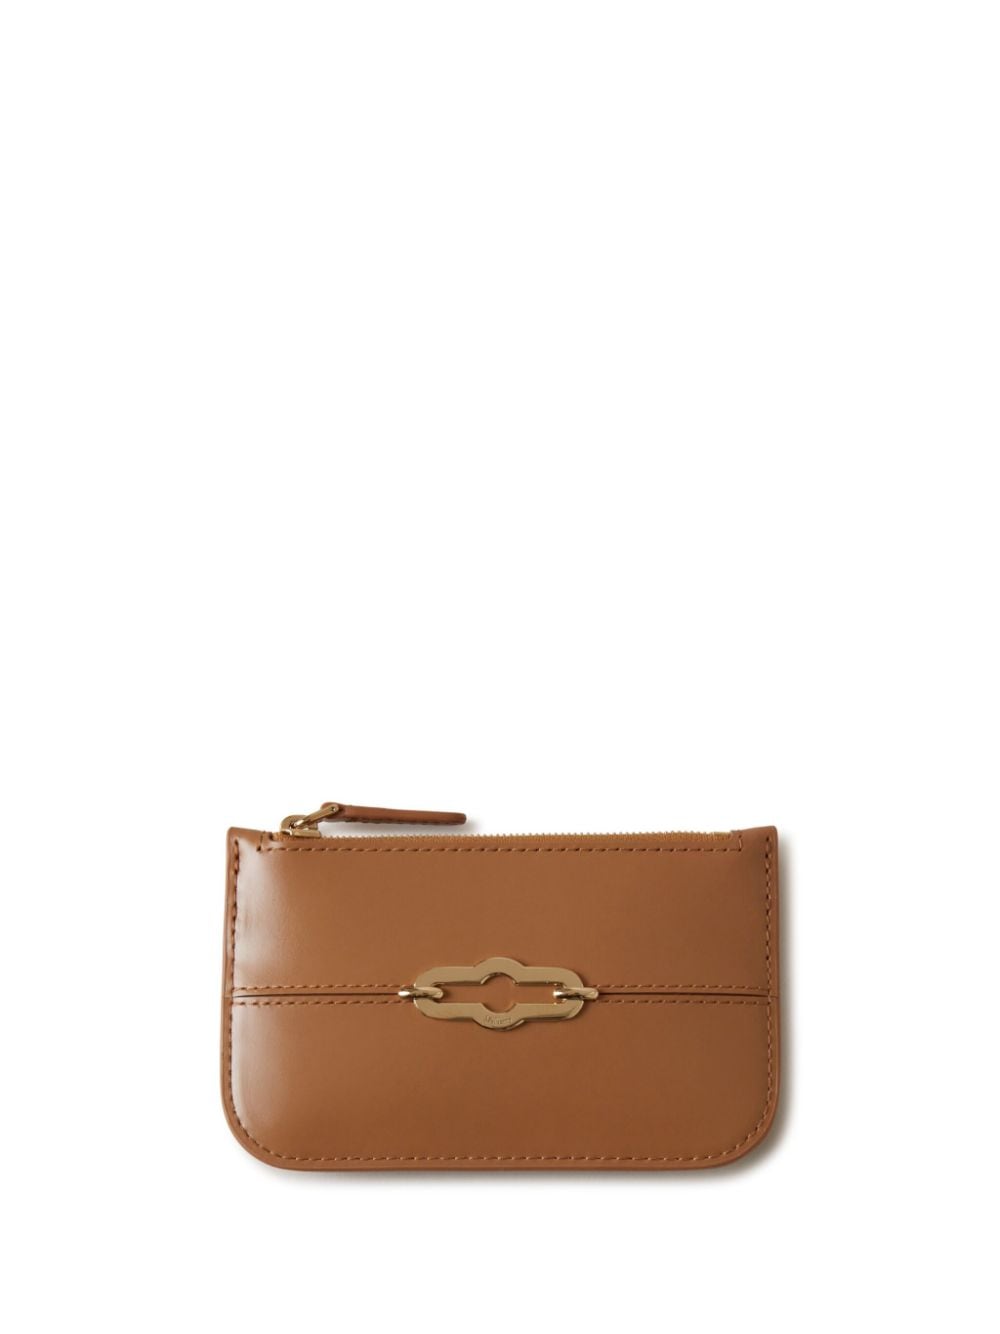 Mulberry Pimlico leather wallet - Brown von Mulberry